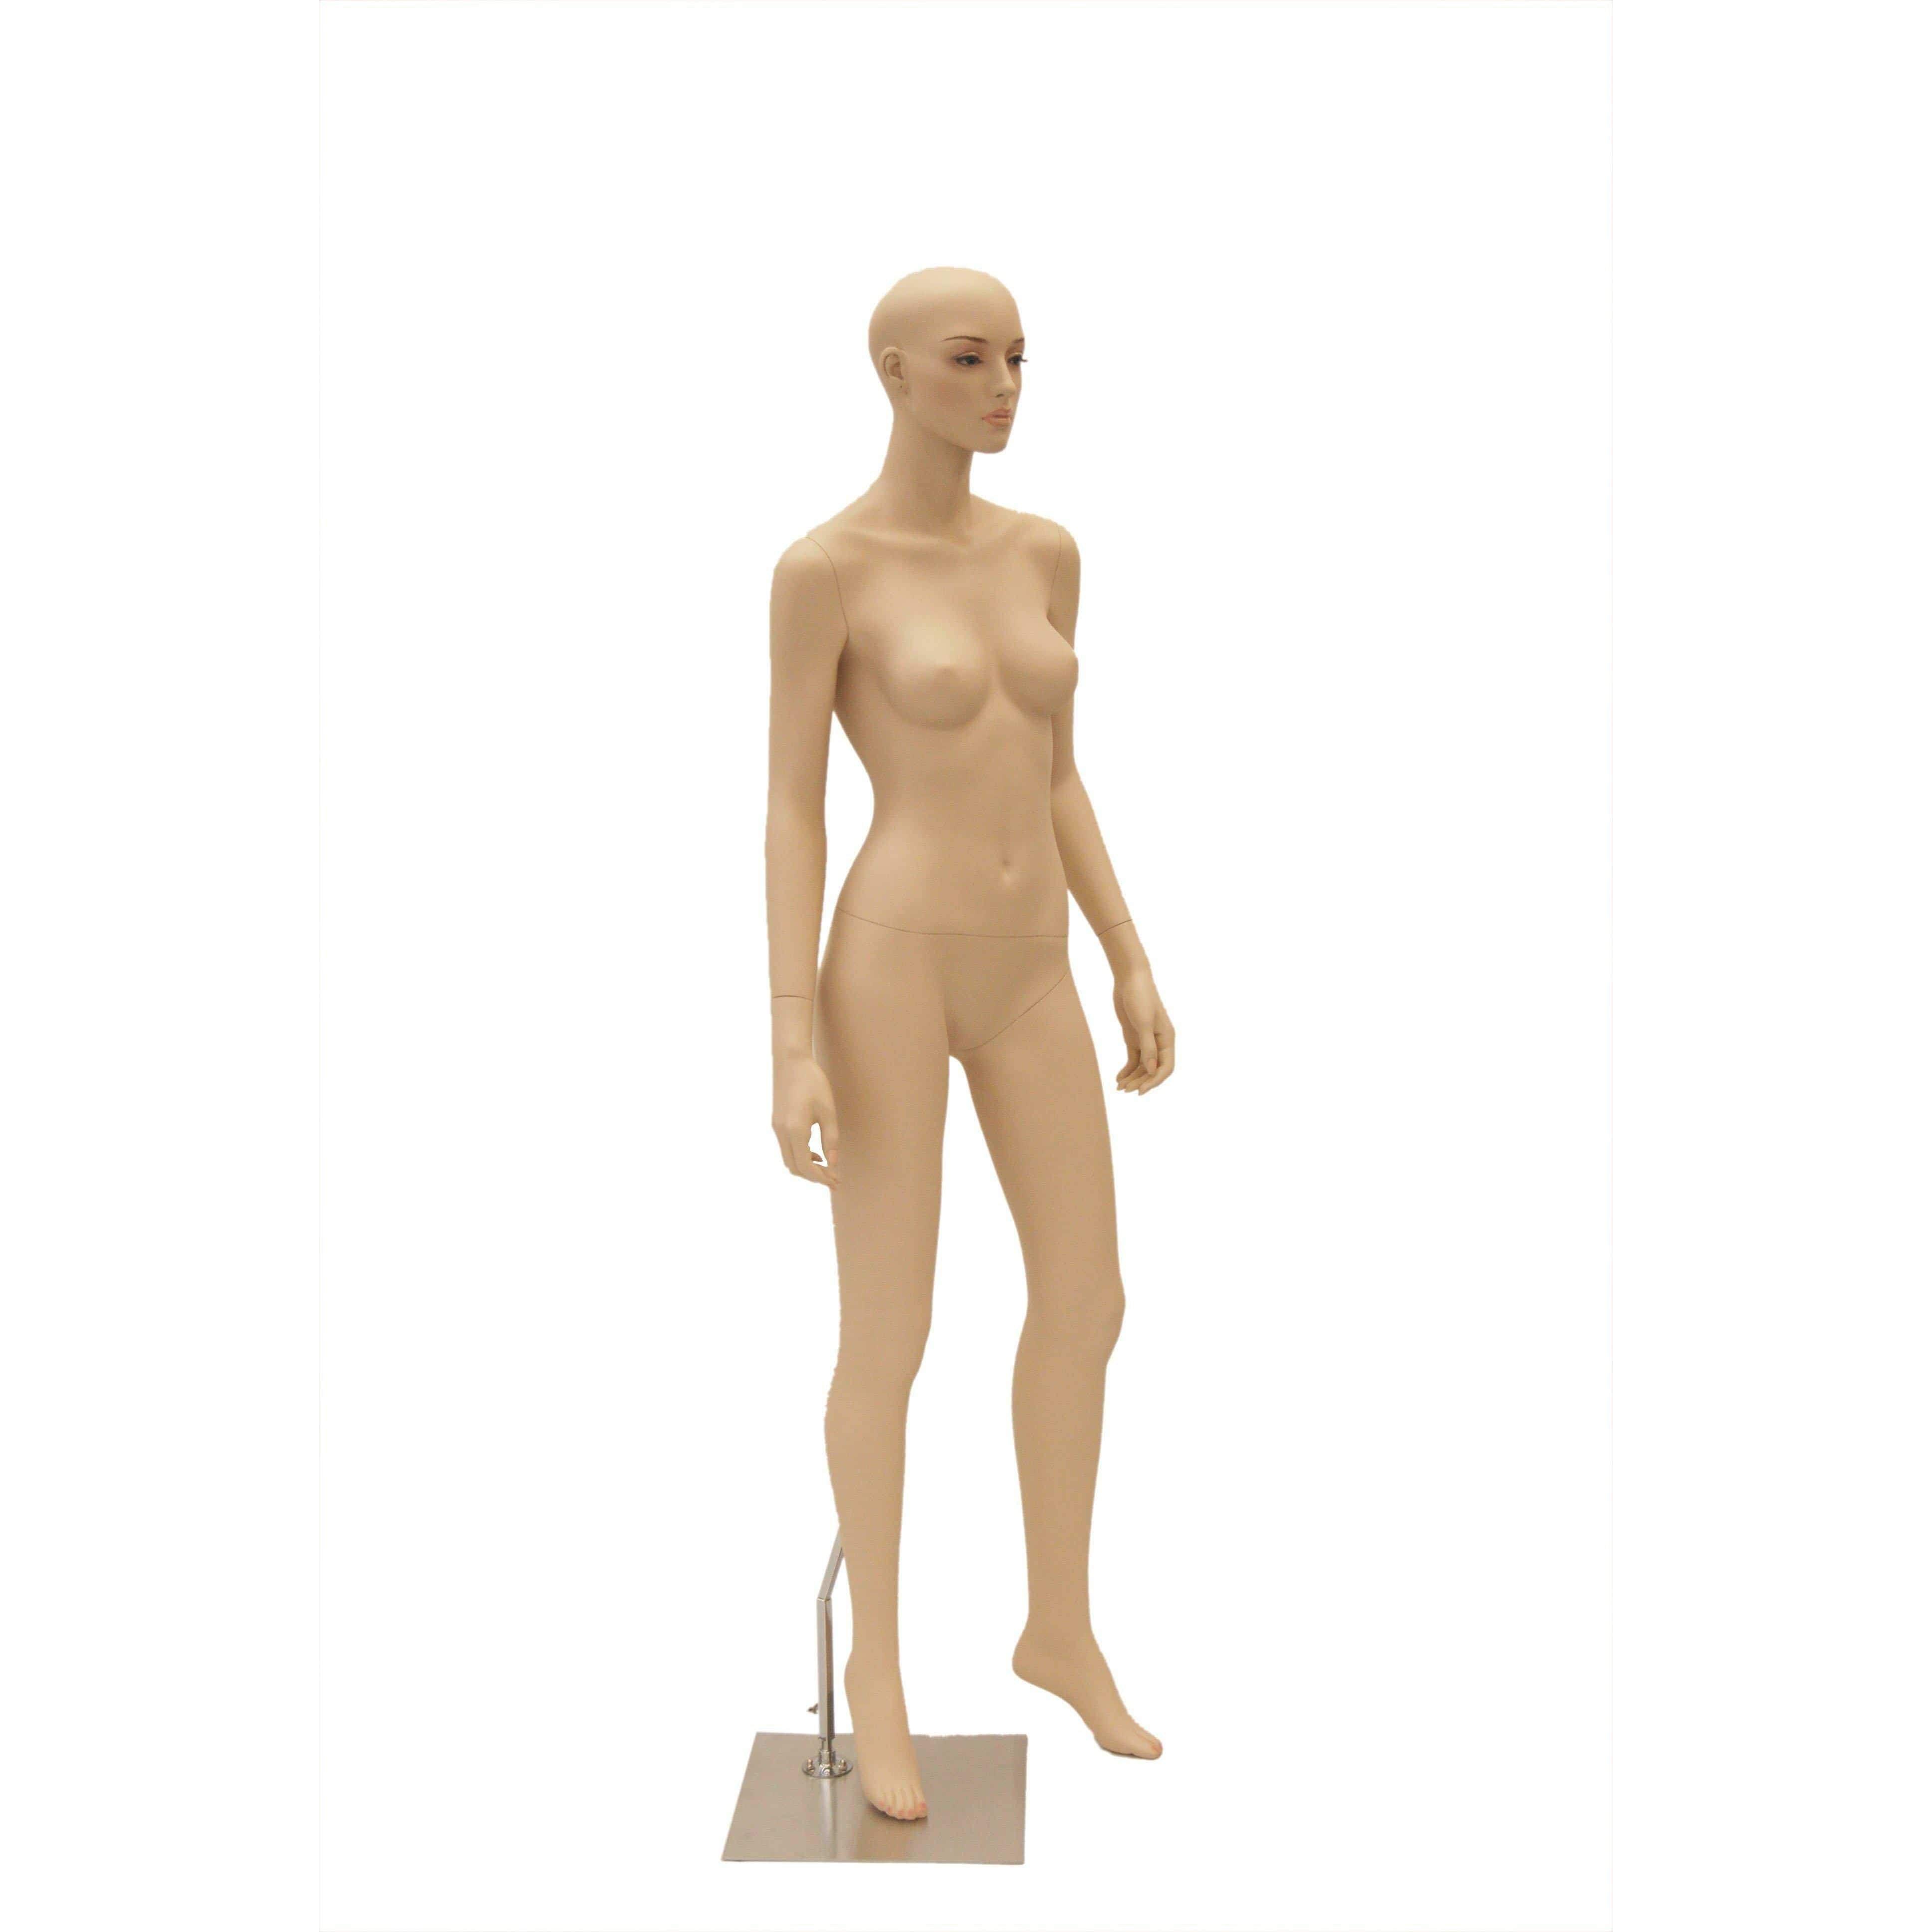 Pack female mannequins realistic